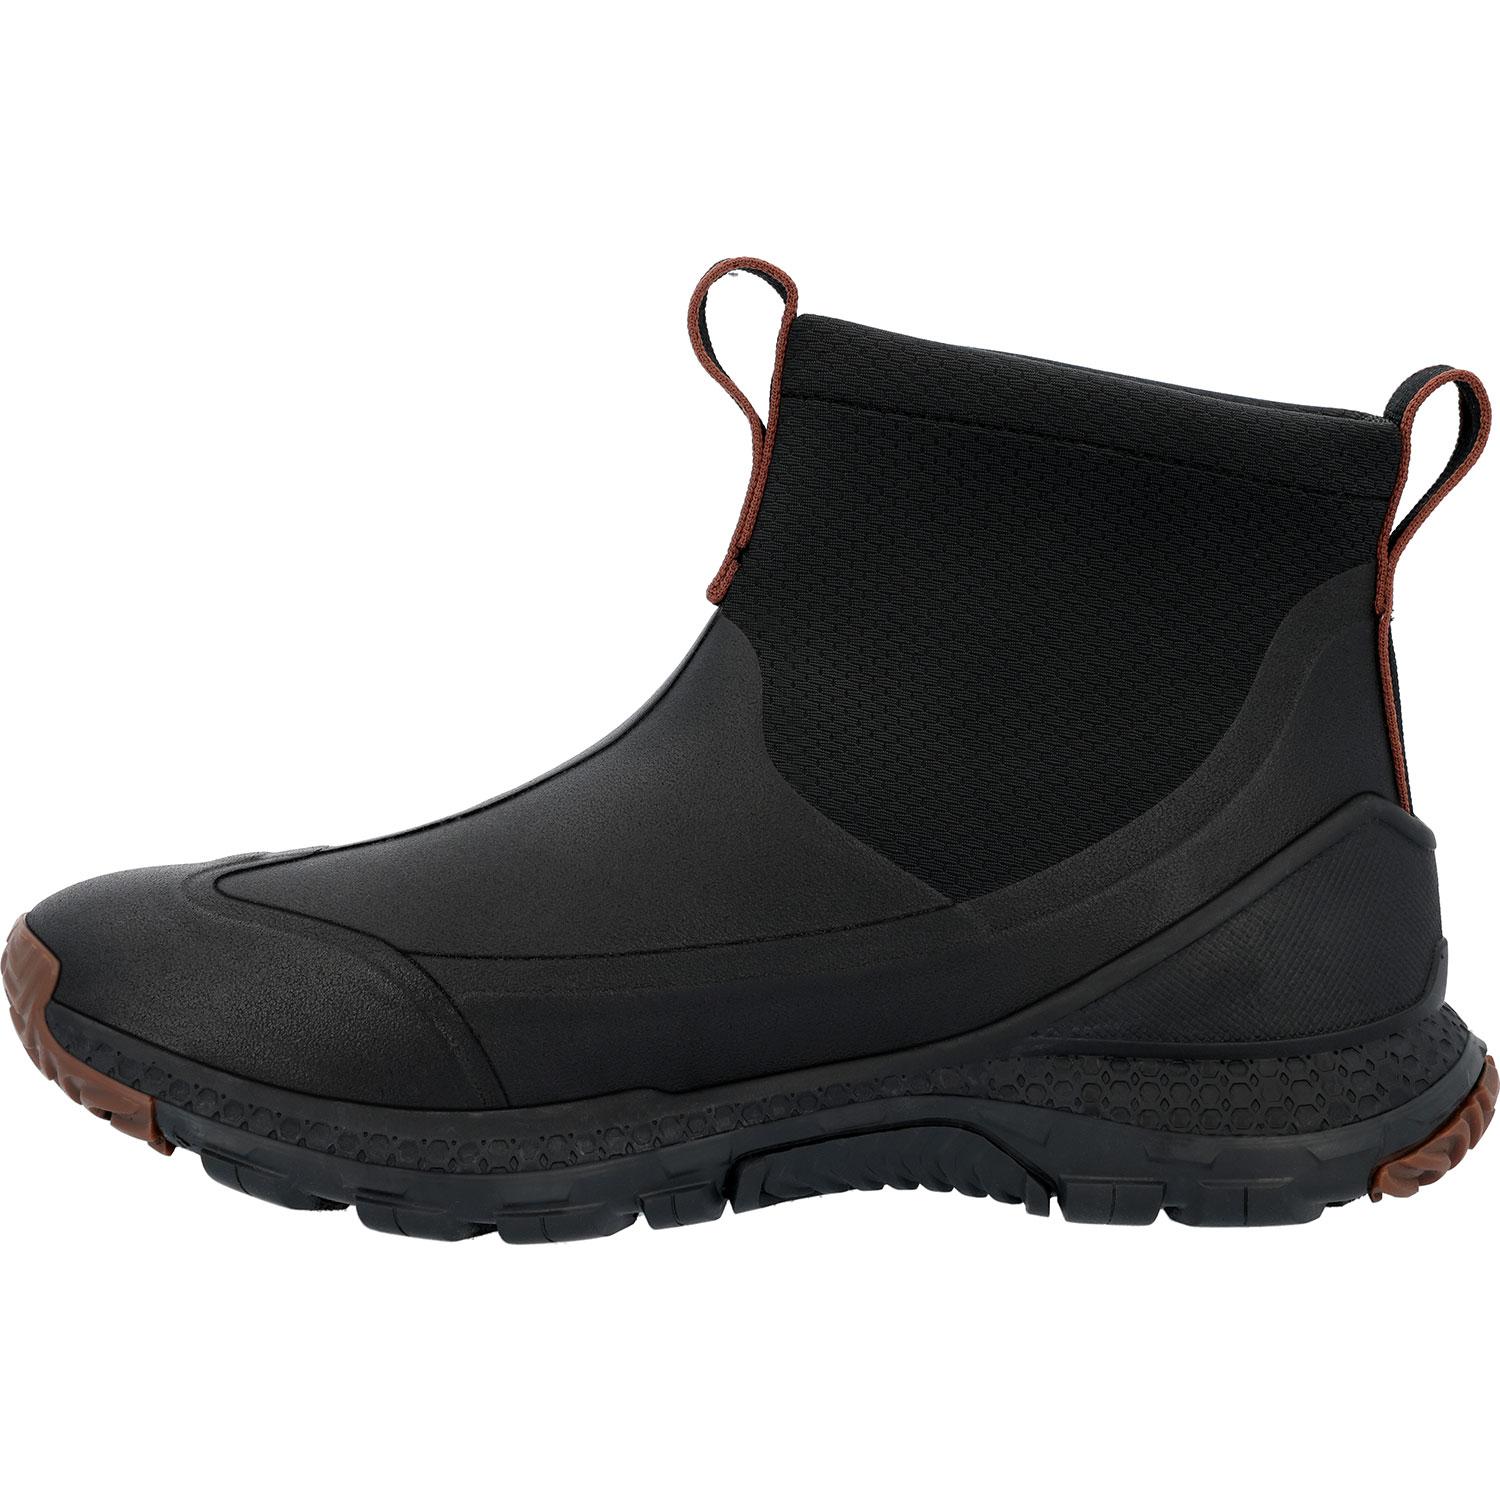 Shop for Muck Men's Outscape Max Slip-On Boot